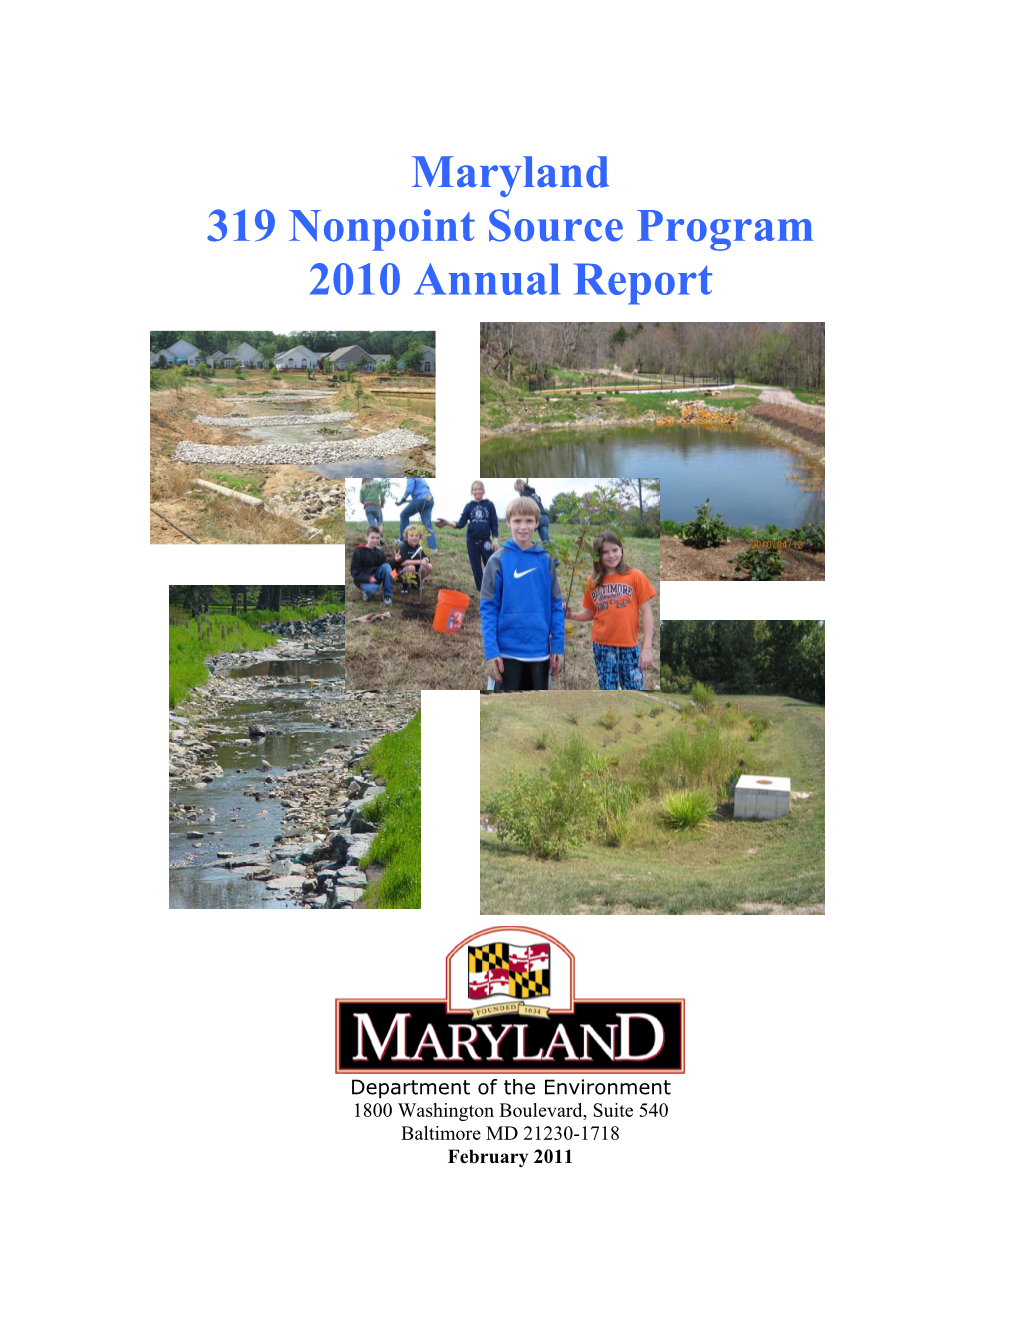 MD 2005 Nonpoint Source Annual Report